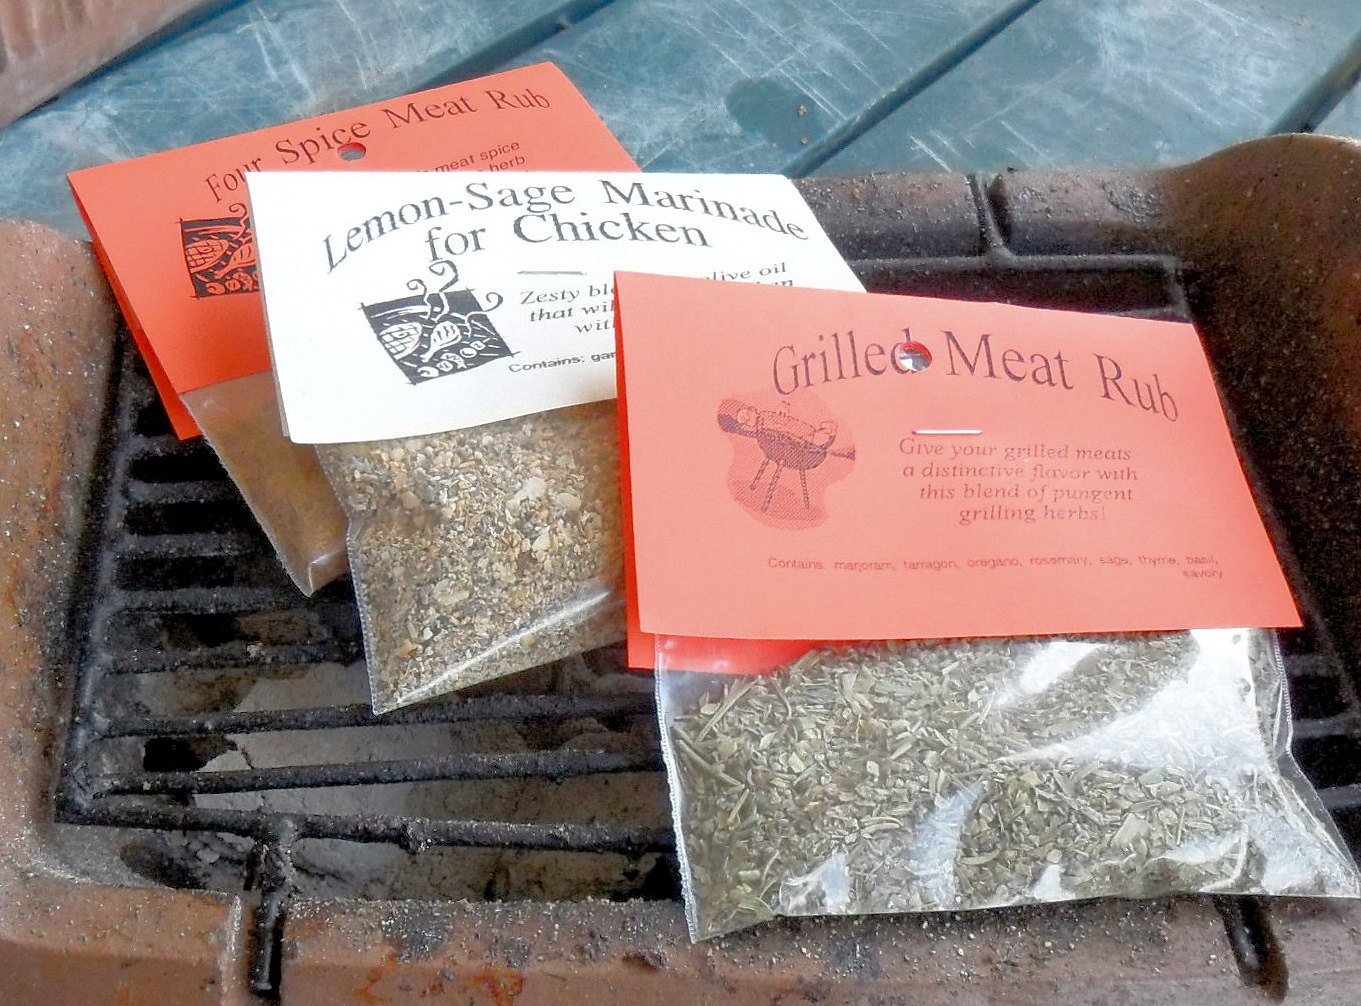 Set of Herb Mixes for grilling